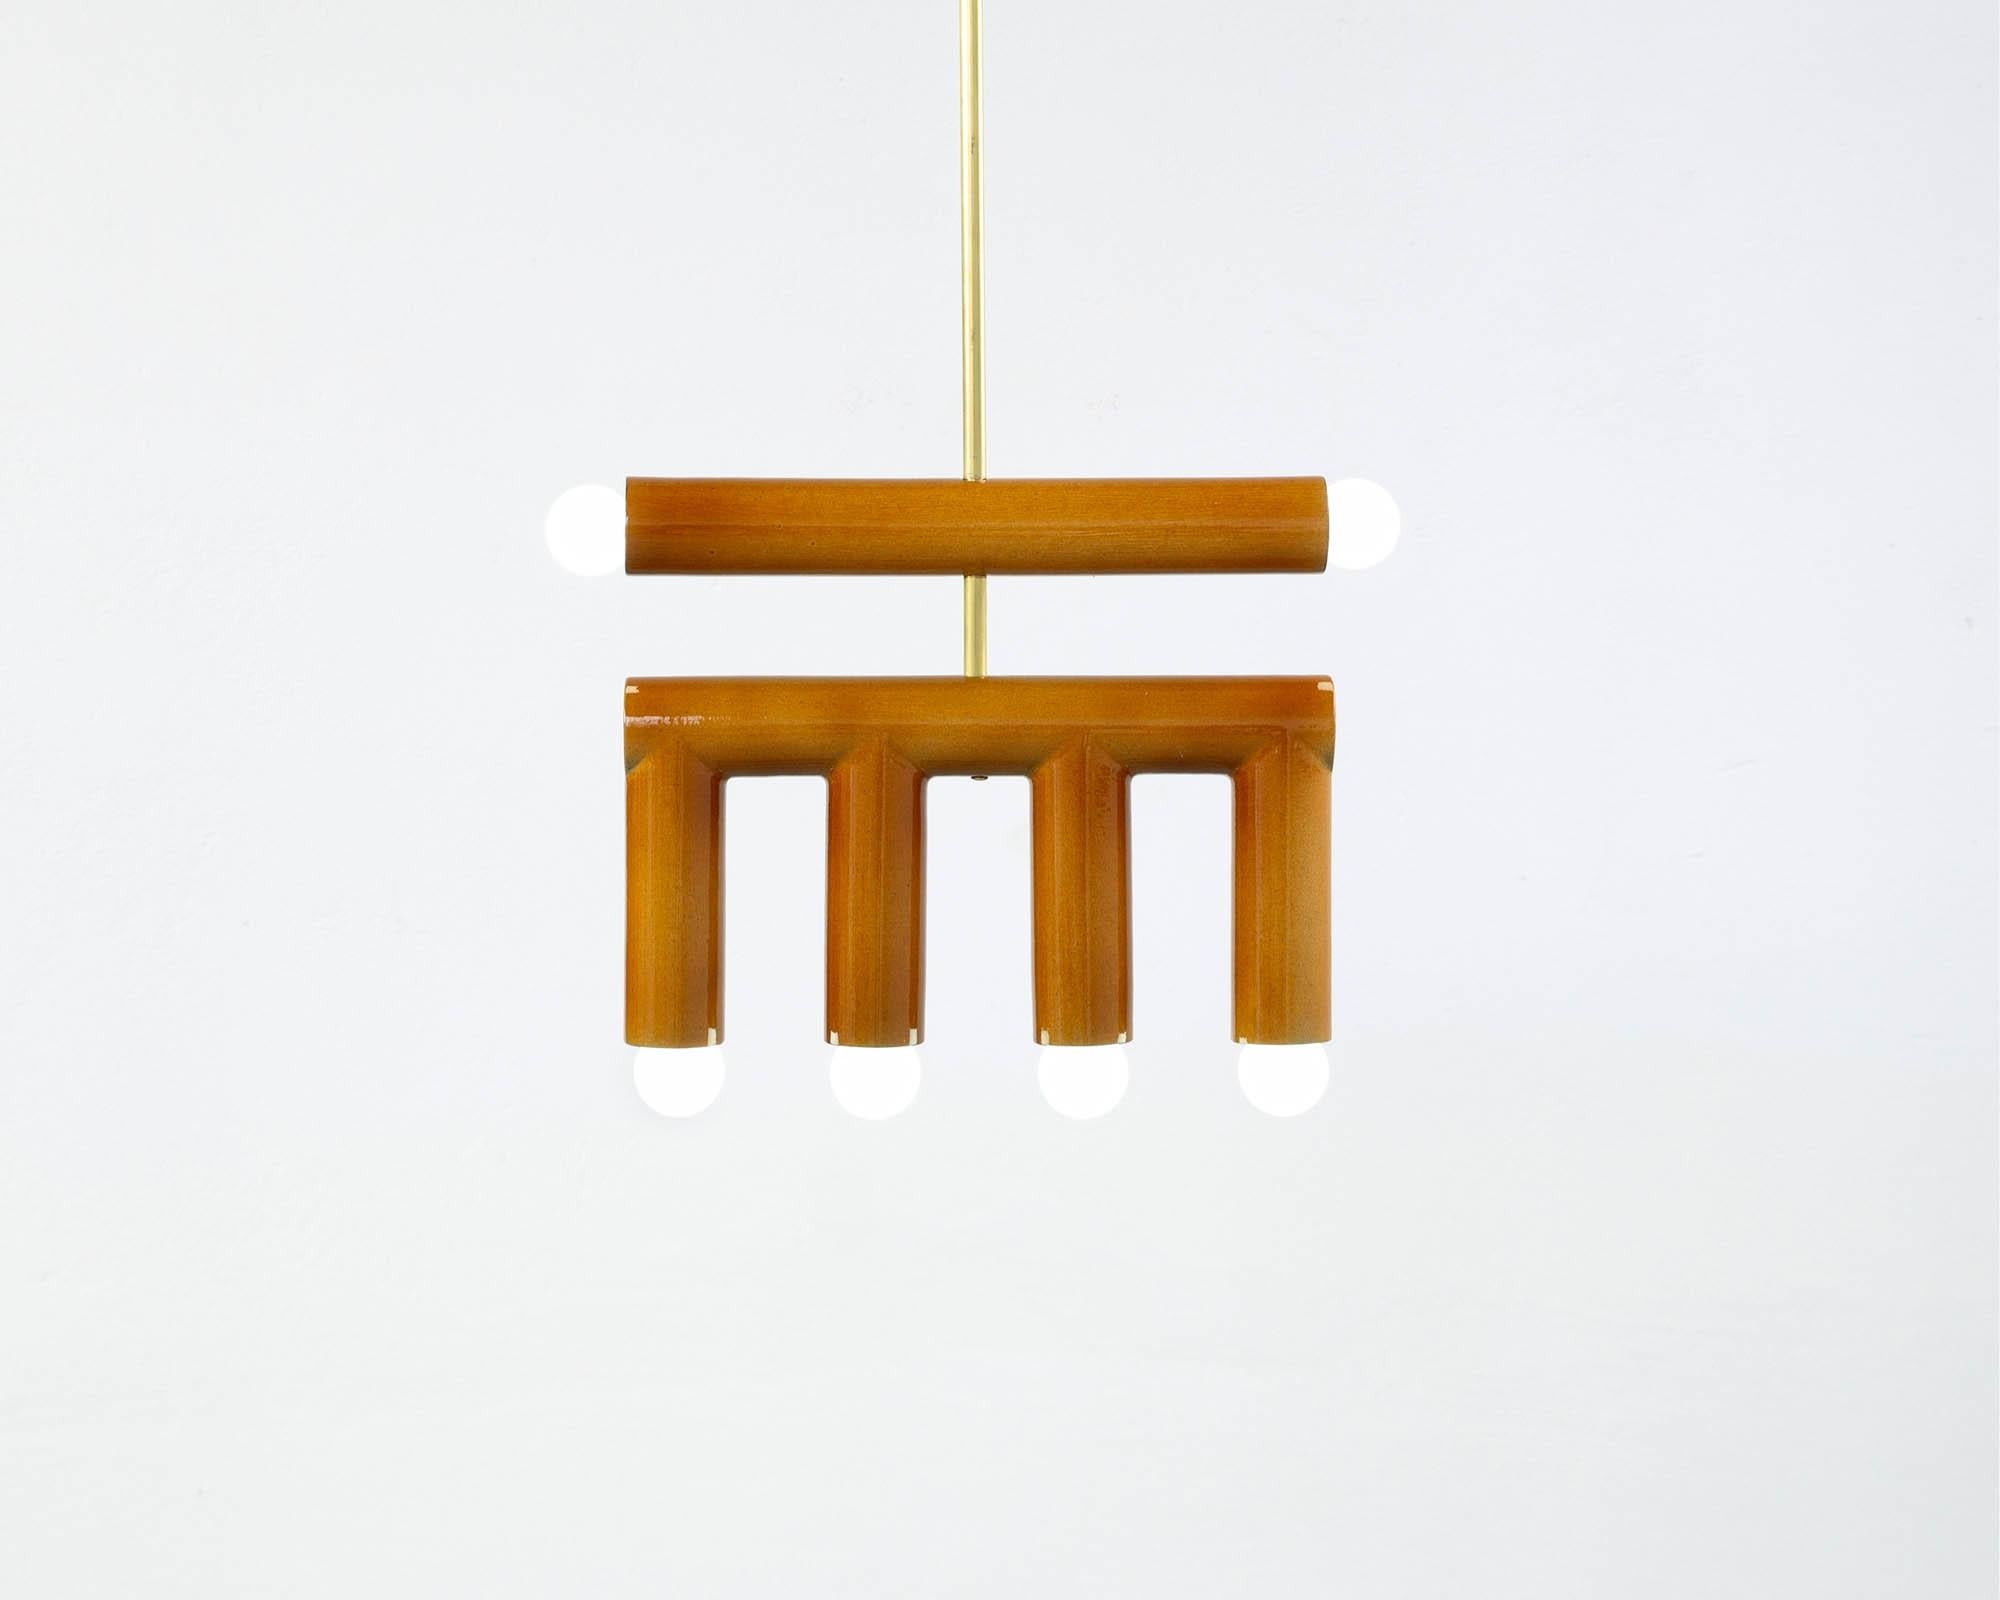 TRN D2 Pendant lamp / ceiling lamp / chandelier 
Signed by Pani Jurek

Dimensions: H28 x 35 x 5 cm
Model shown: Ochre 

Bulb (not included): E27/E26, compatible with US electric system

Materials: Hand-glazed ceramic and brass
Rod: brass, length